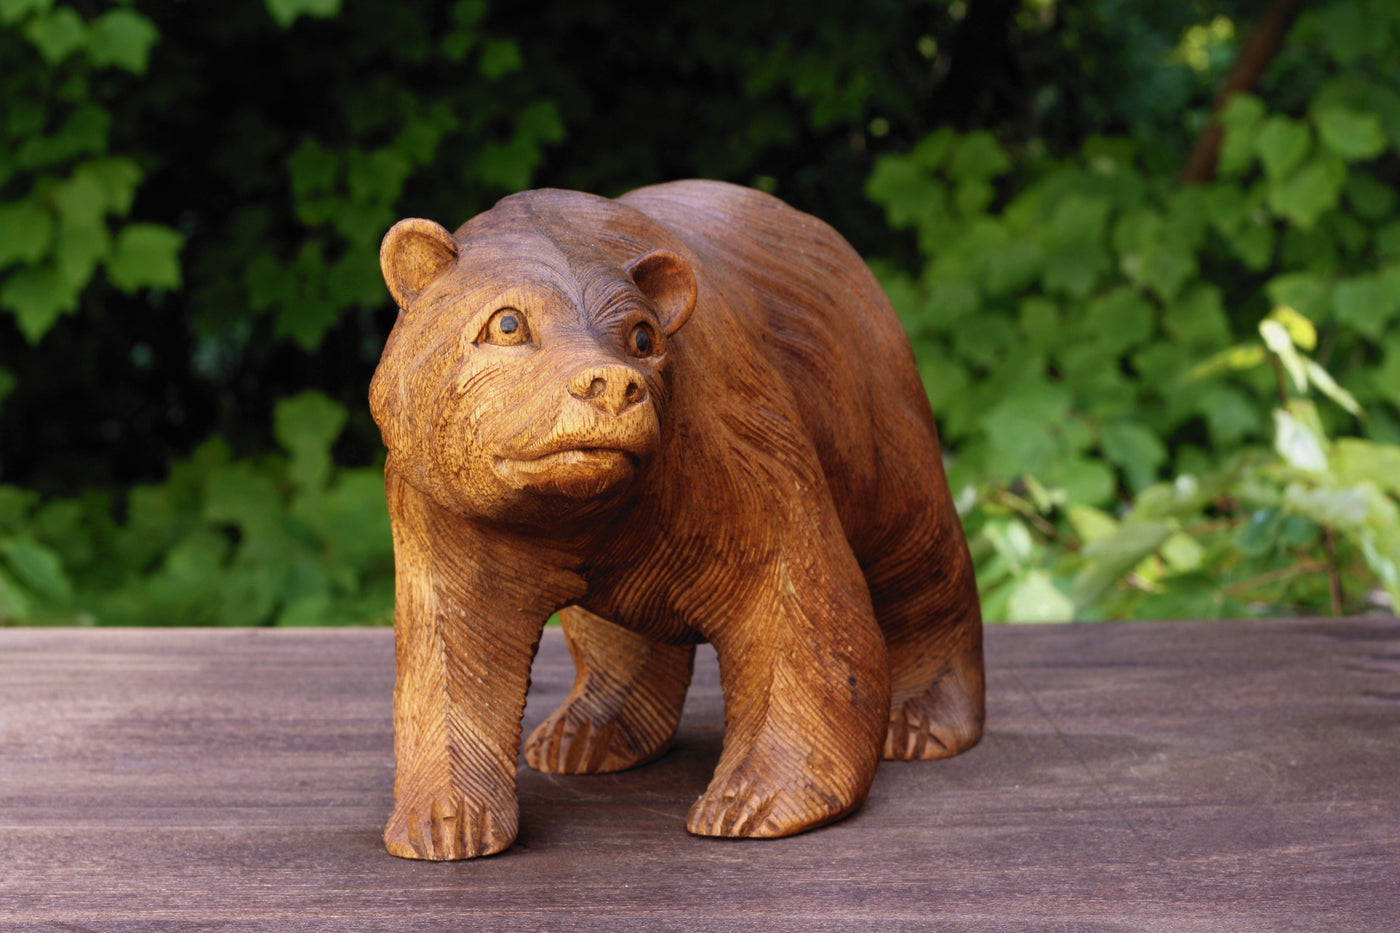 Wooden Hand Carved Bear Statue Handcrafted Handmade Figurine Sculpture Lodge Cabin Home Decor Accent Decoration Art